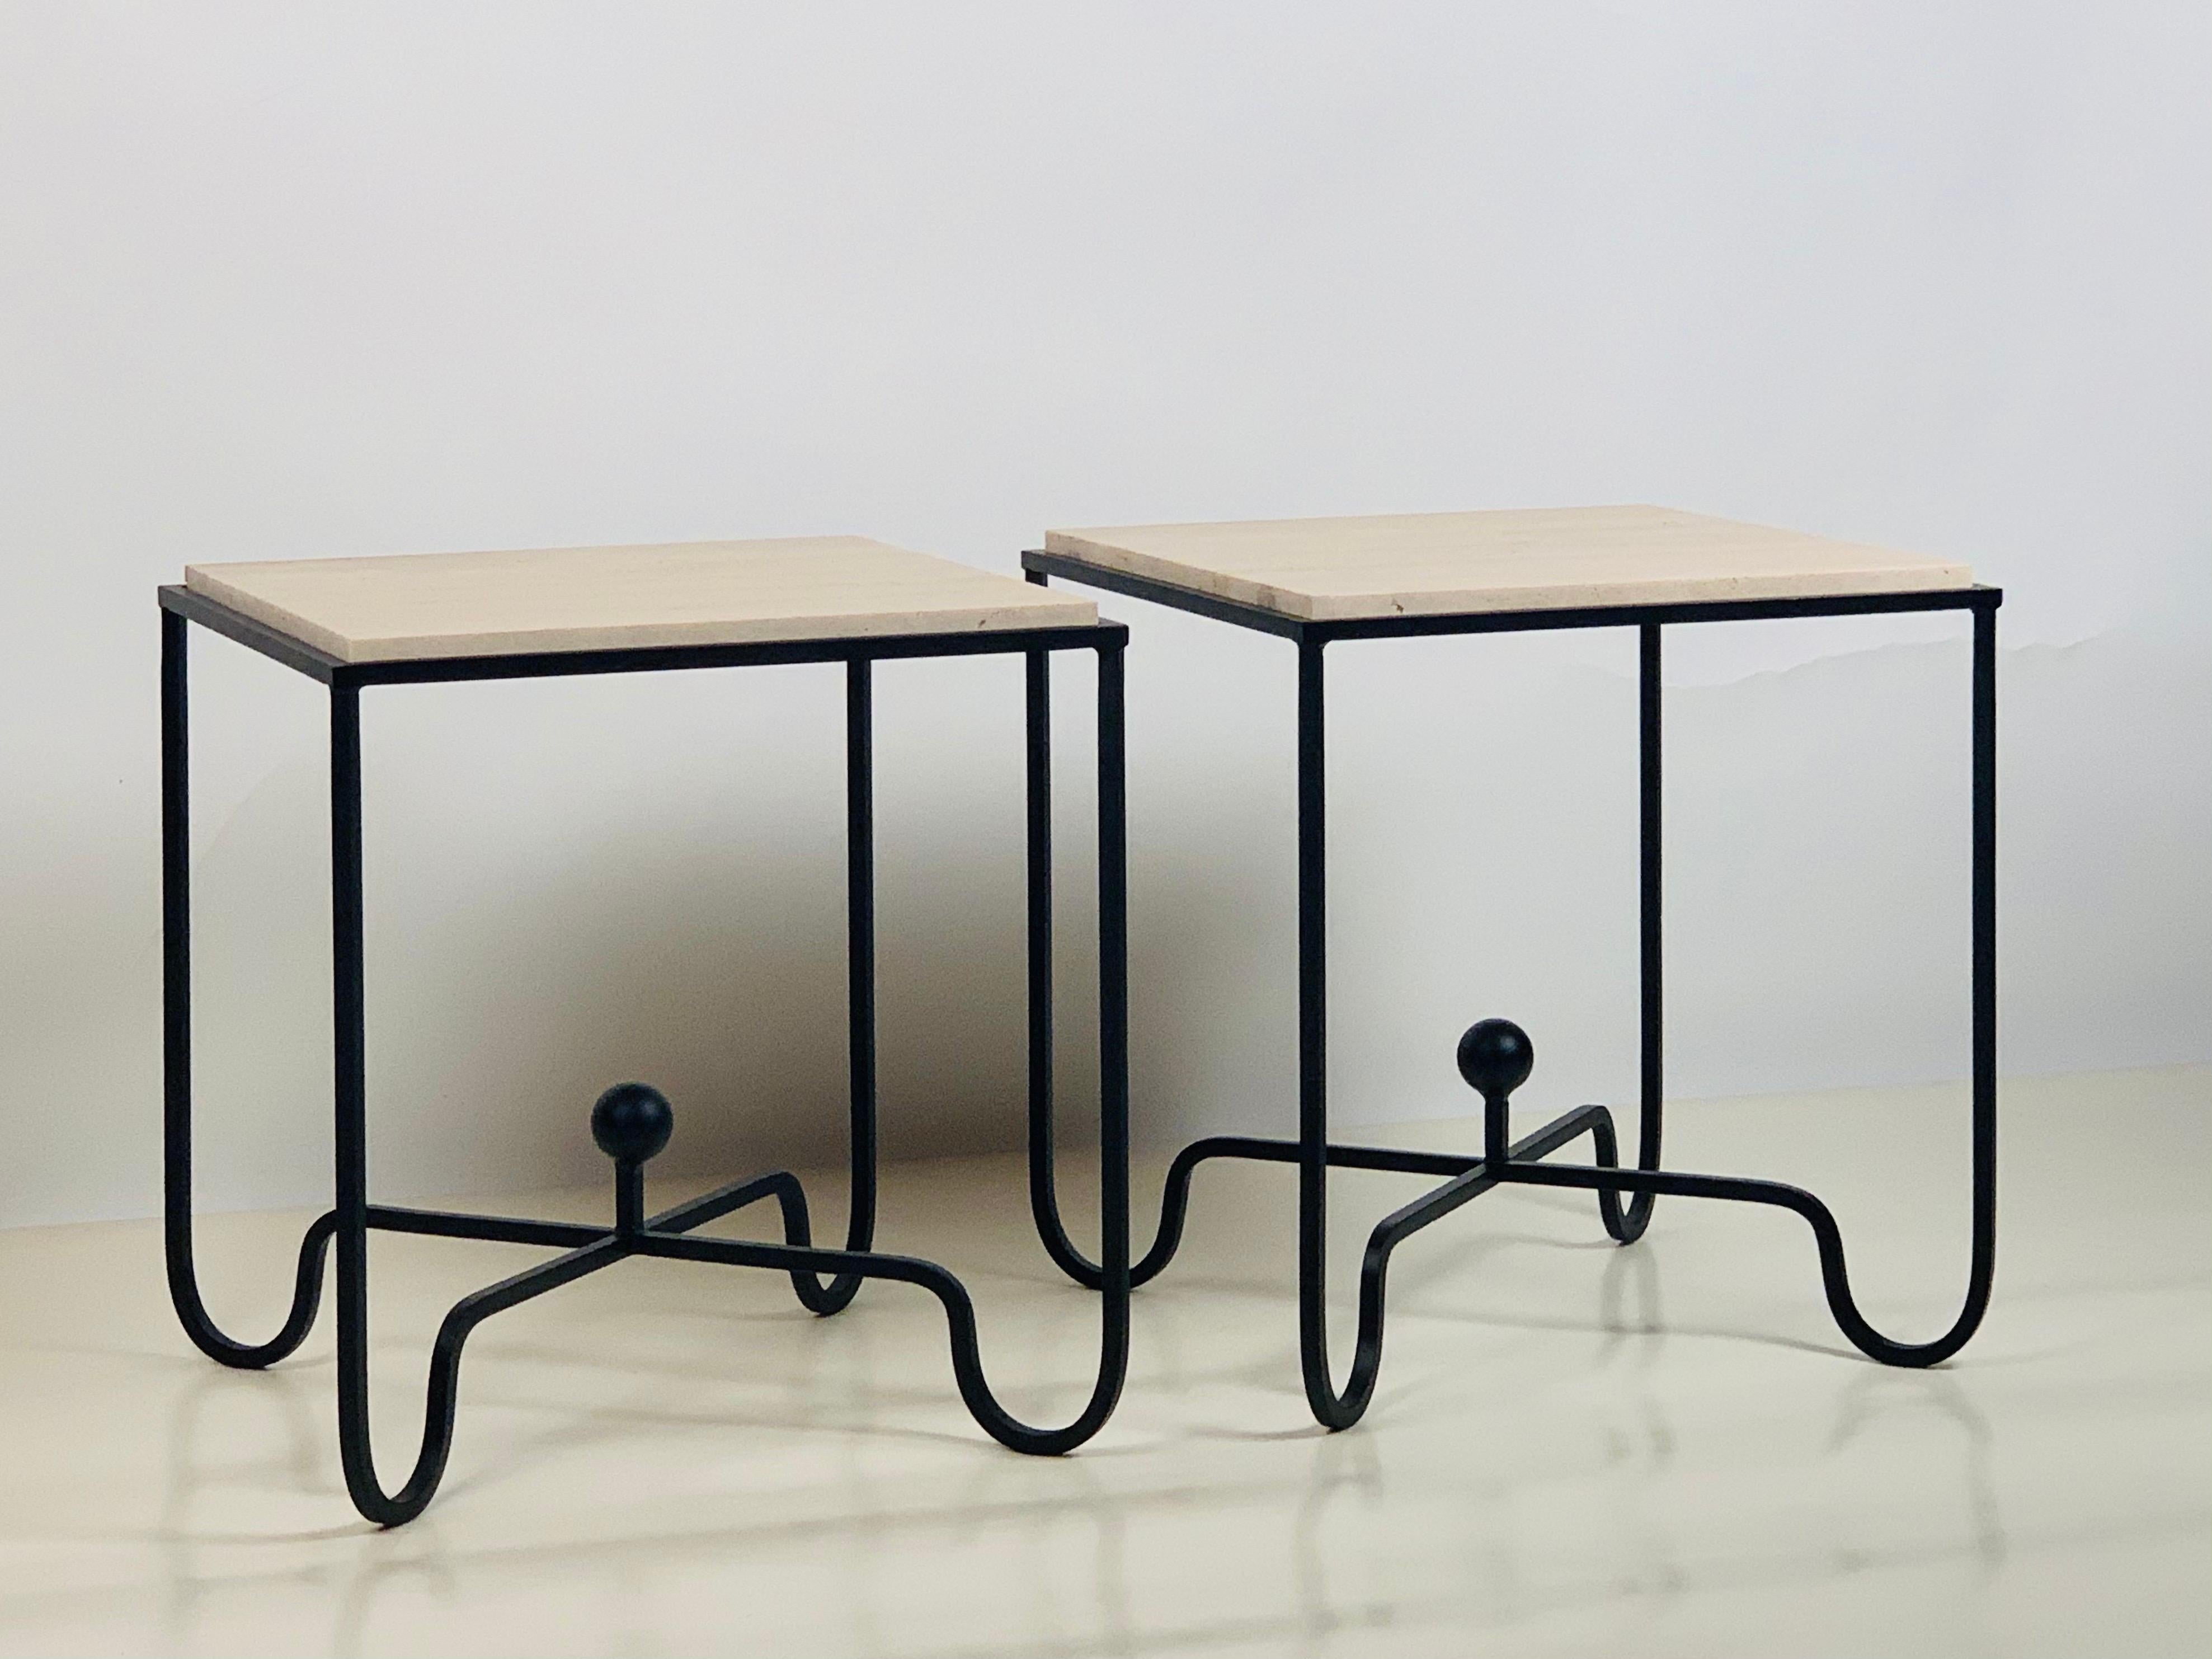 French Pair of Tall Iron and Travertine 'Entretoise' Side Tables by Design Frères For Sale